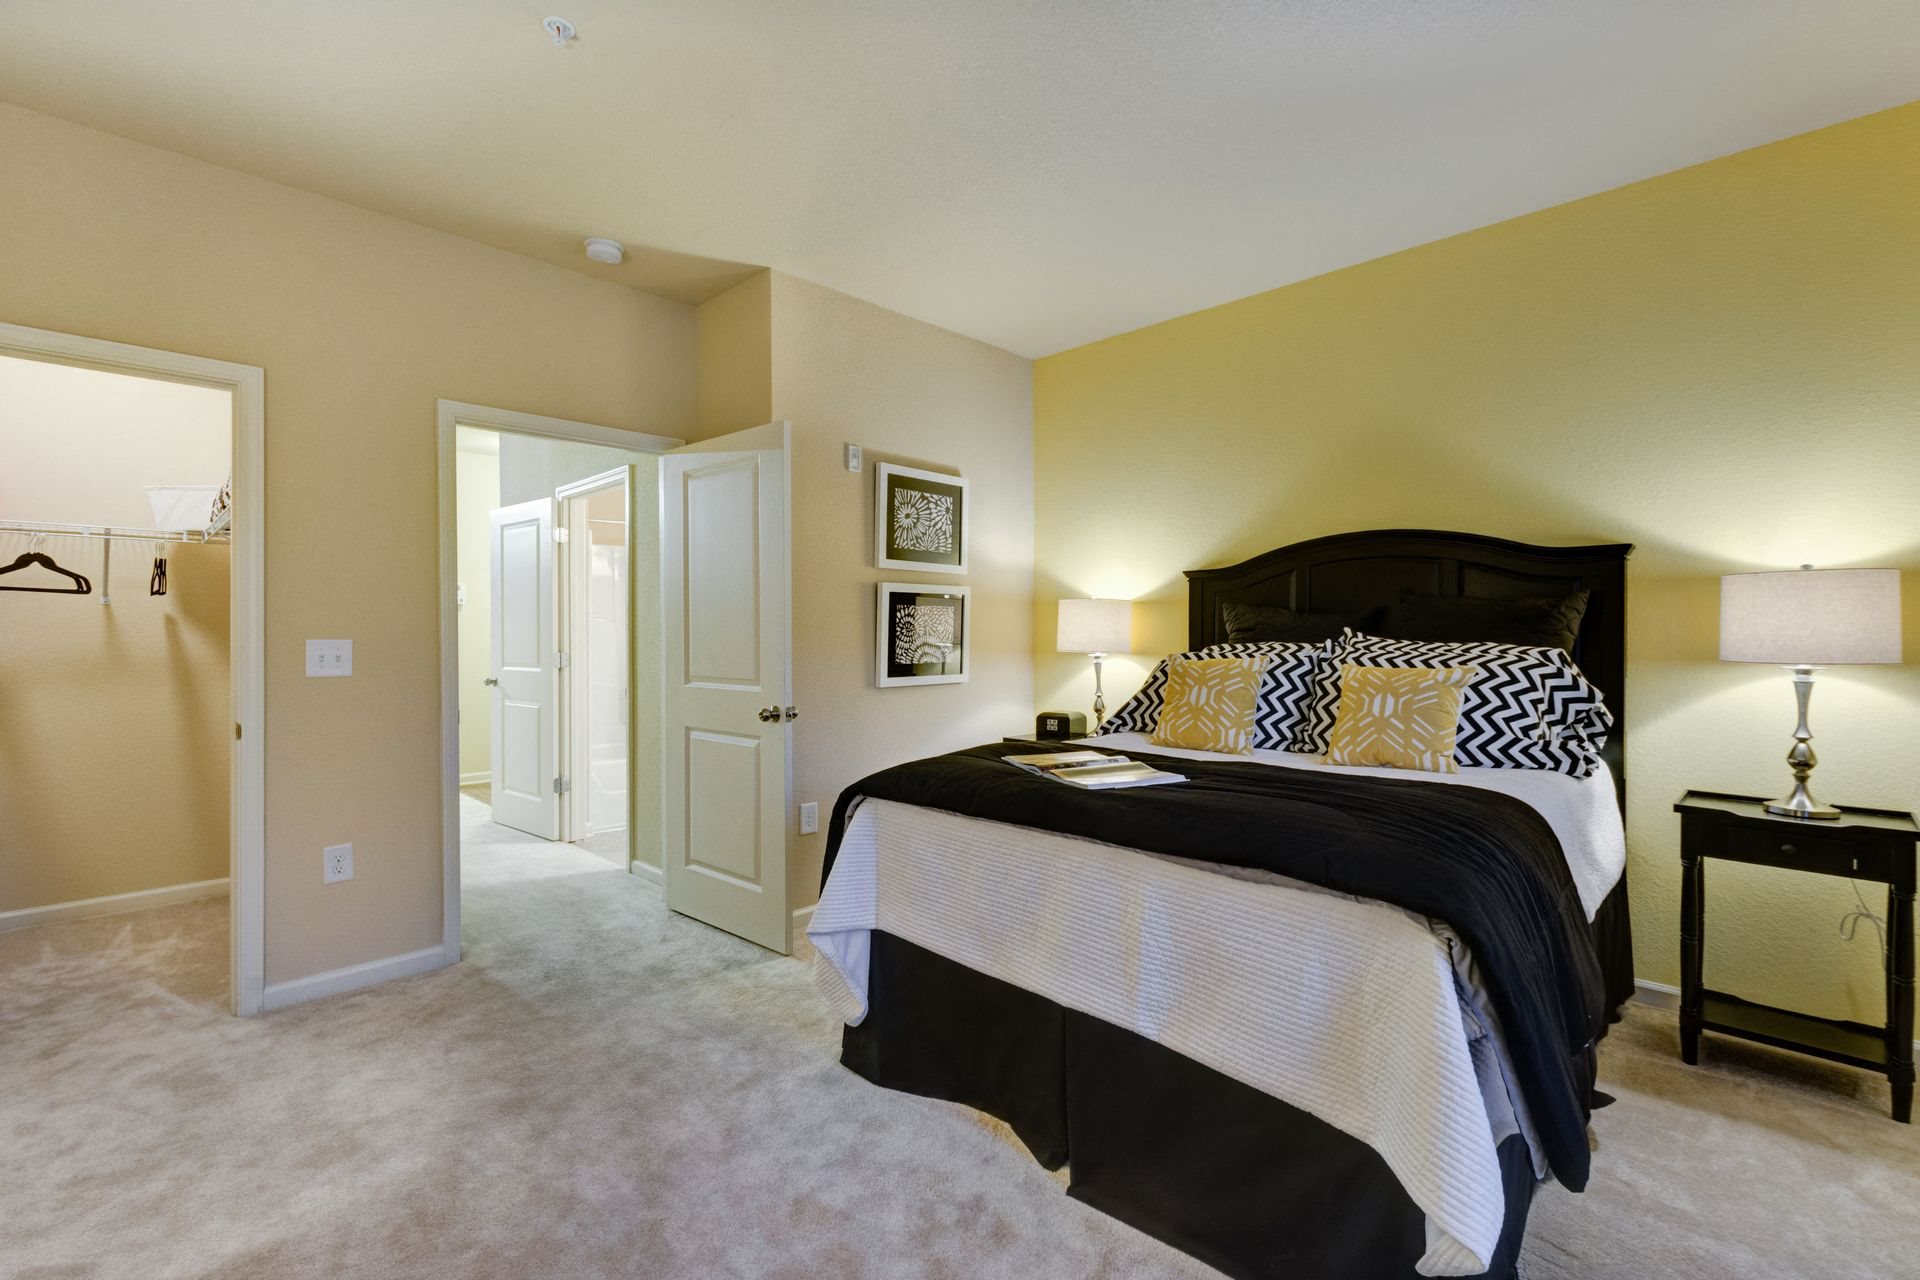 Private Master Bedroom at Ultris Patriot Park, Fayetteville, NC,28311